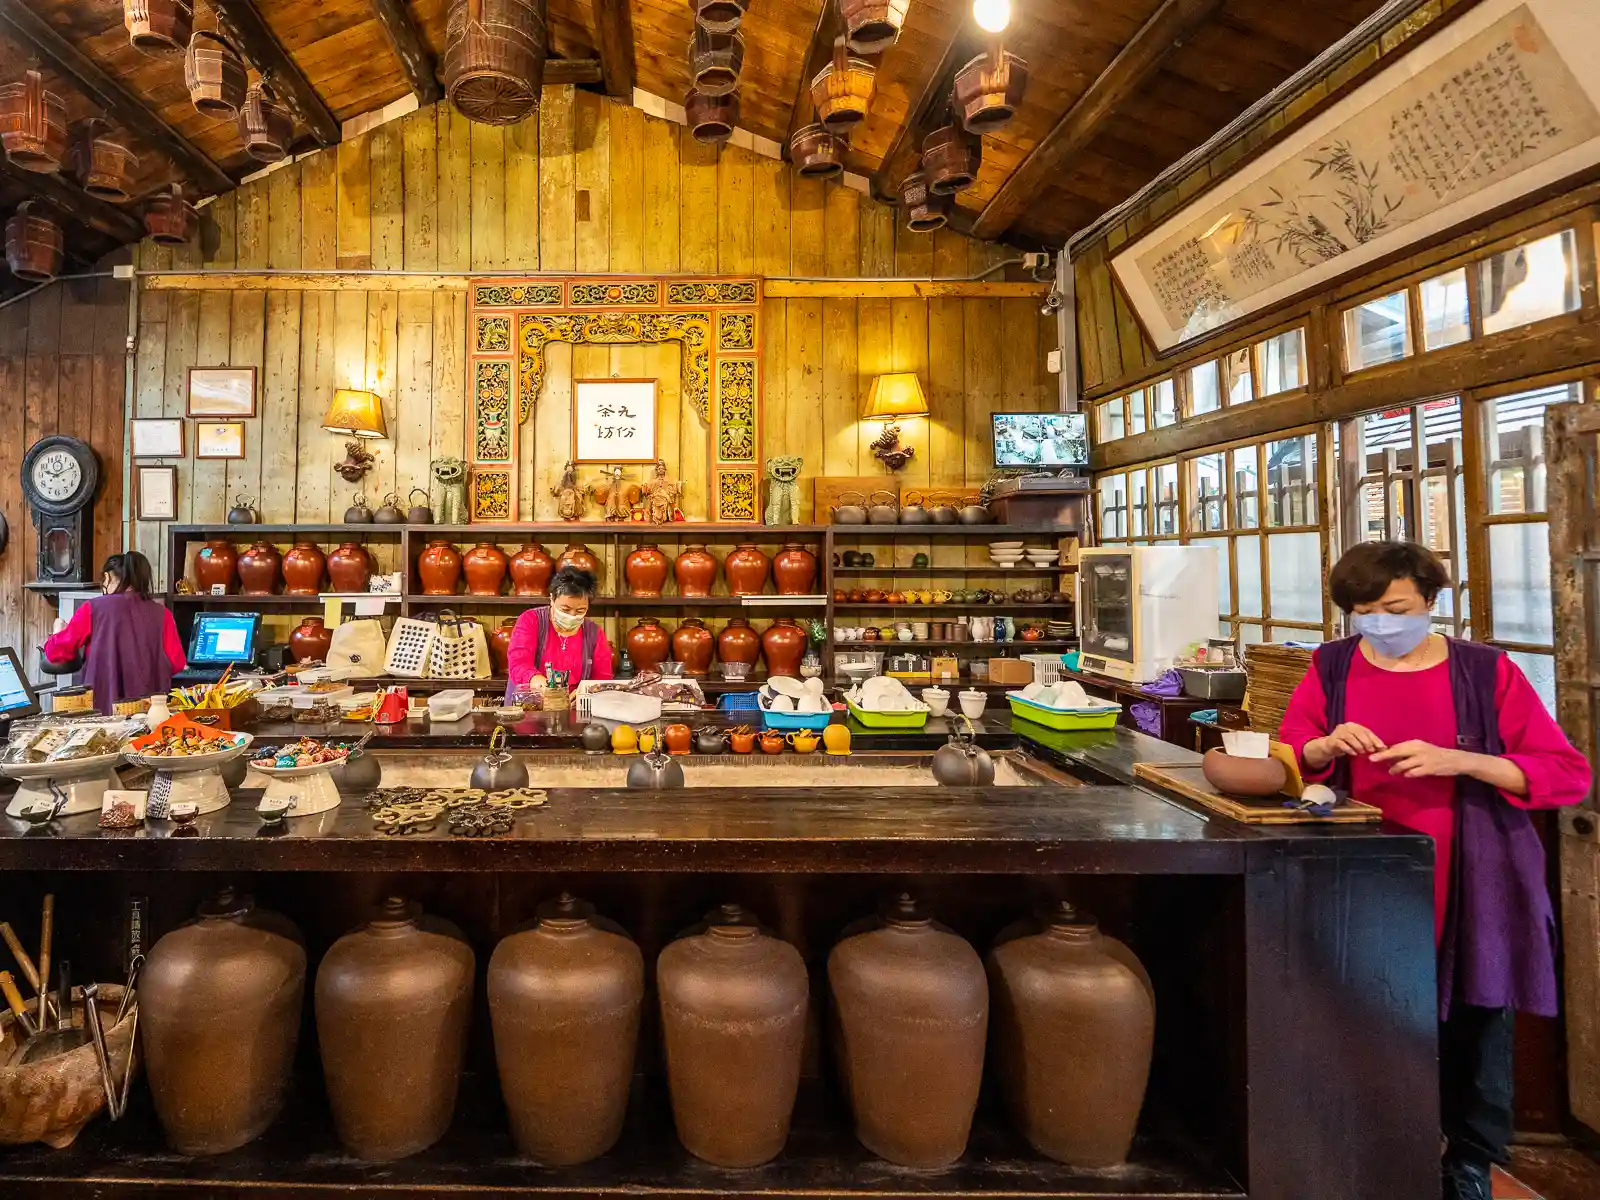 Every corner of the lobby is decorated with rustic pottery, tea kettles, and tea-related objects.